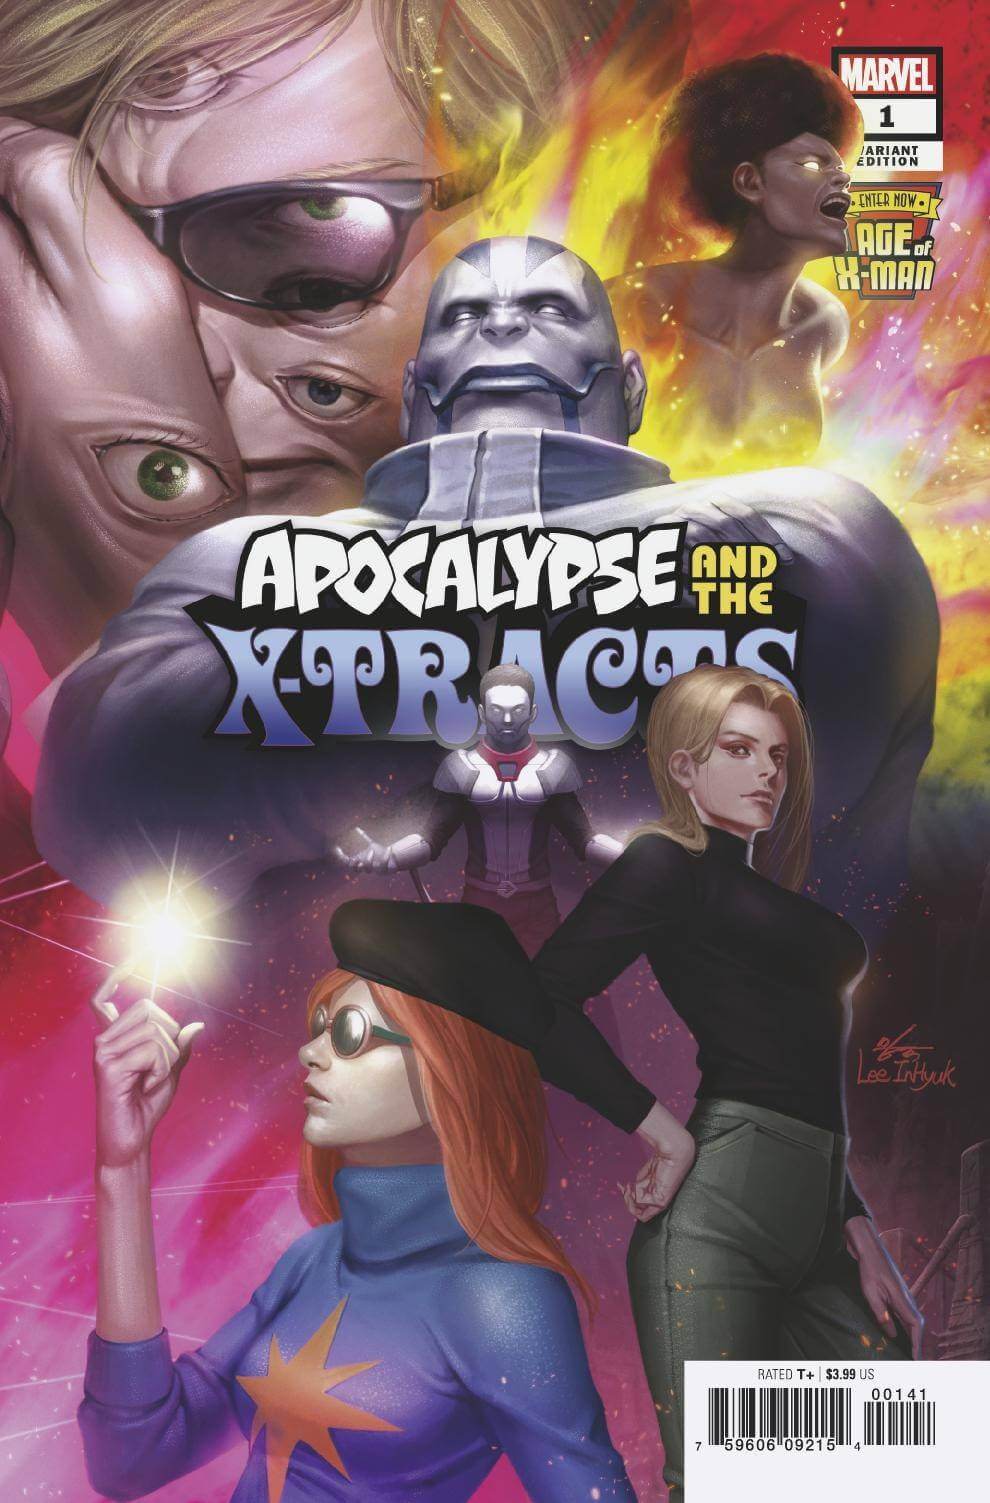 AGE OF X-MAN APOCALYPSE AND X-TRACTS #1 (OF 5) In-Hyuk Lee Conecting Variant Tim Seeley (03/13/2019) MARVEL